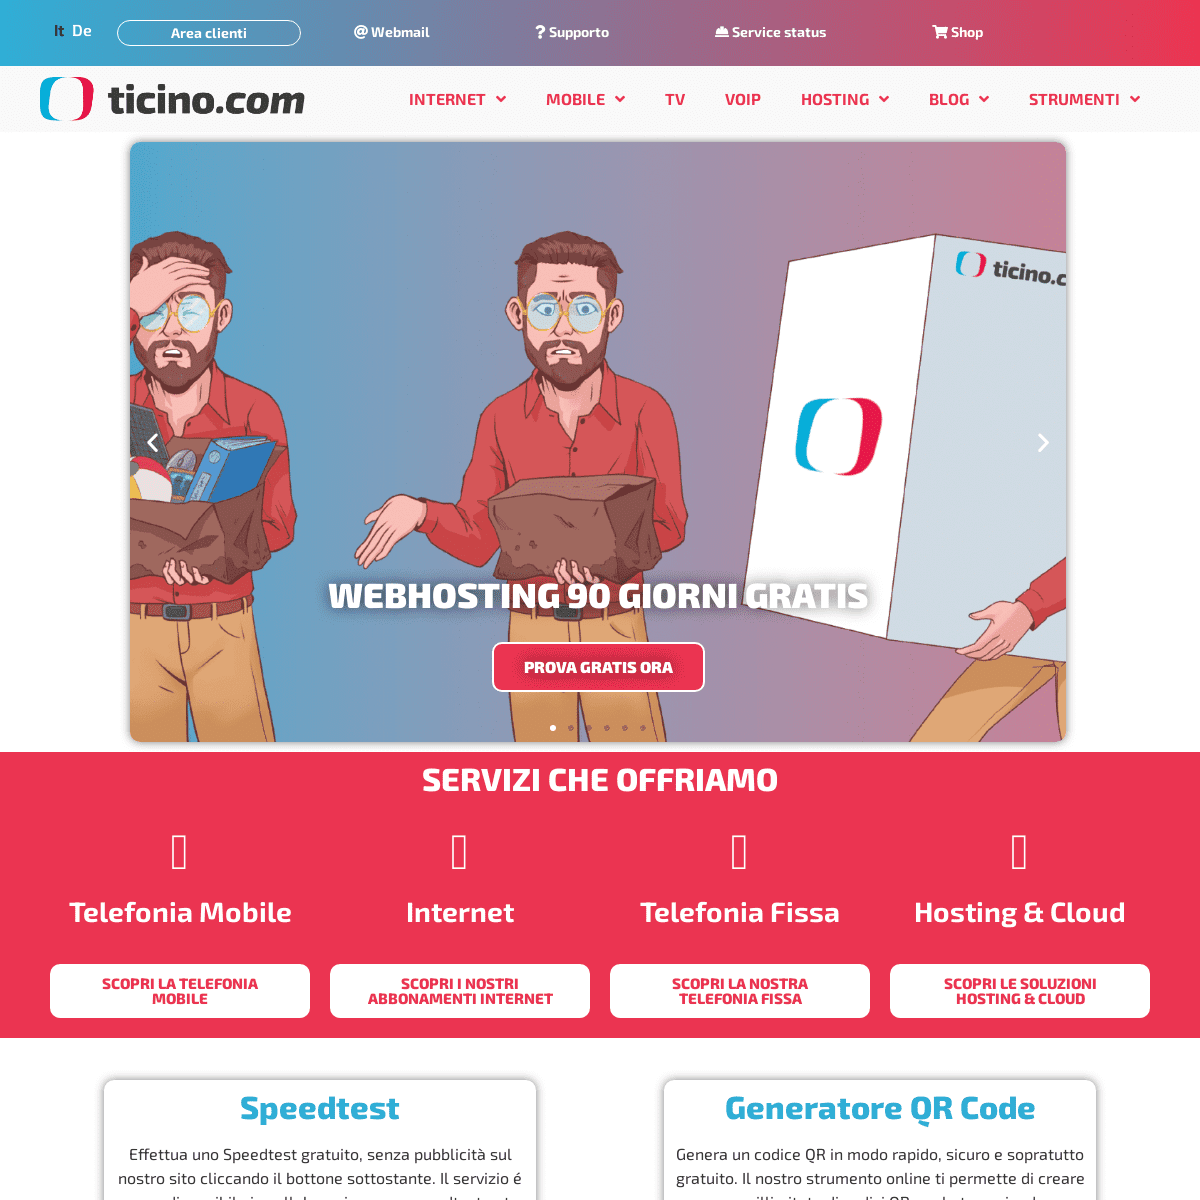 A complete backup of https://ticino.com